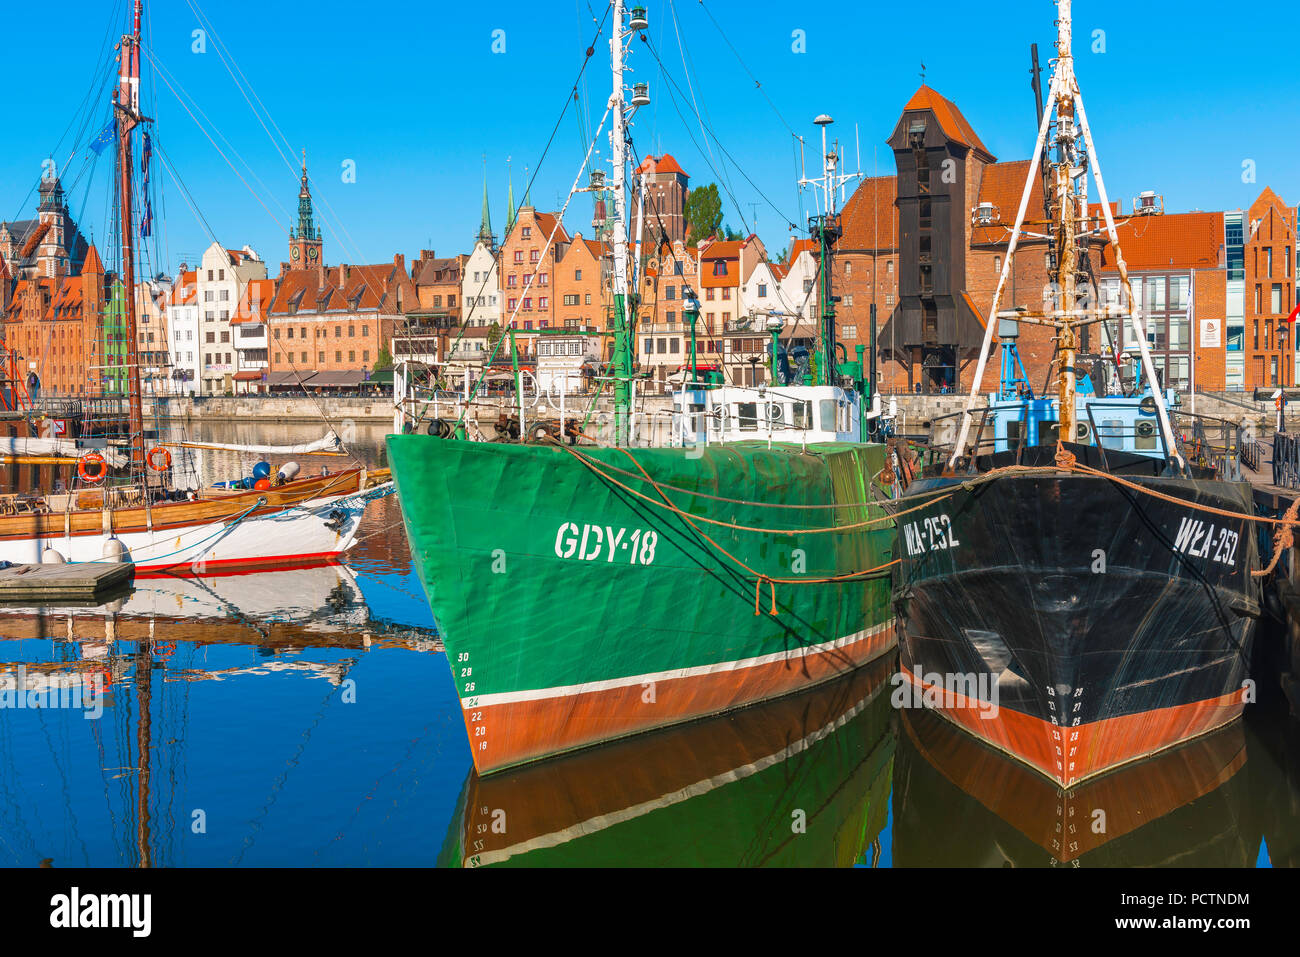 Gdansk river port, view of  the Motlawa waterfront in the historical Old Town quarter of Gdansk, Pomerania, Poland. Stock Photo